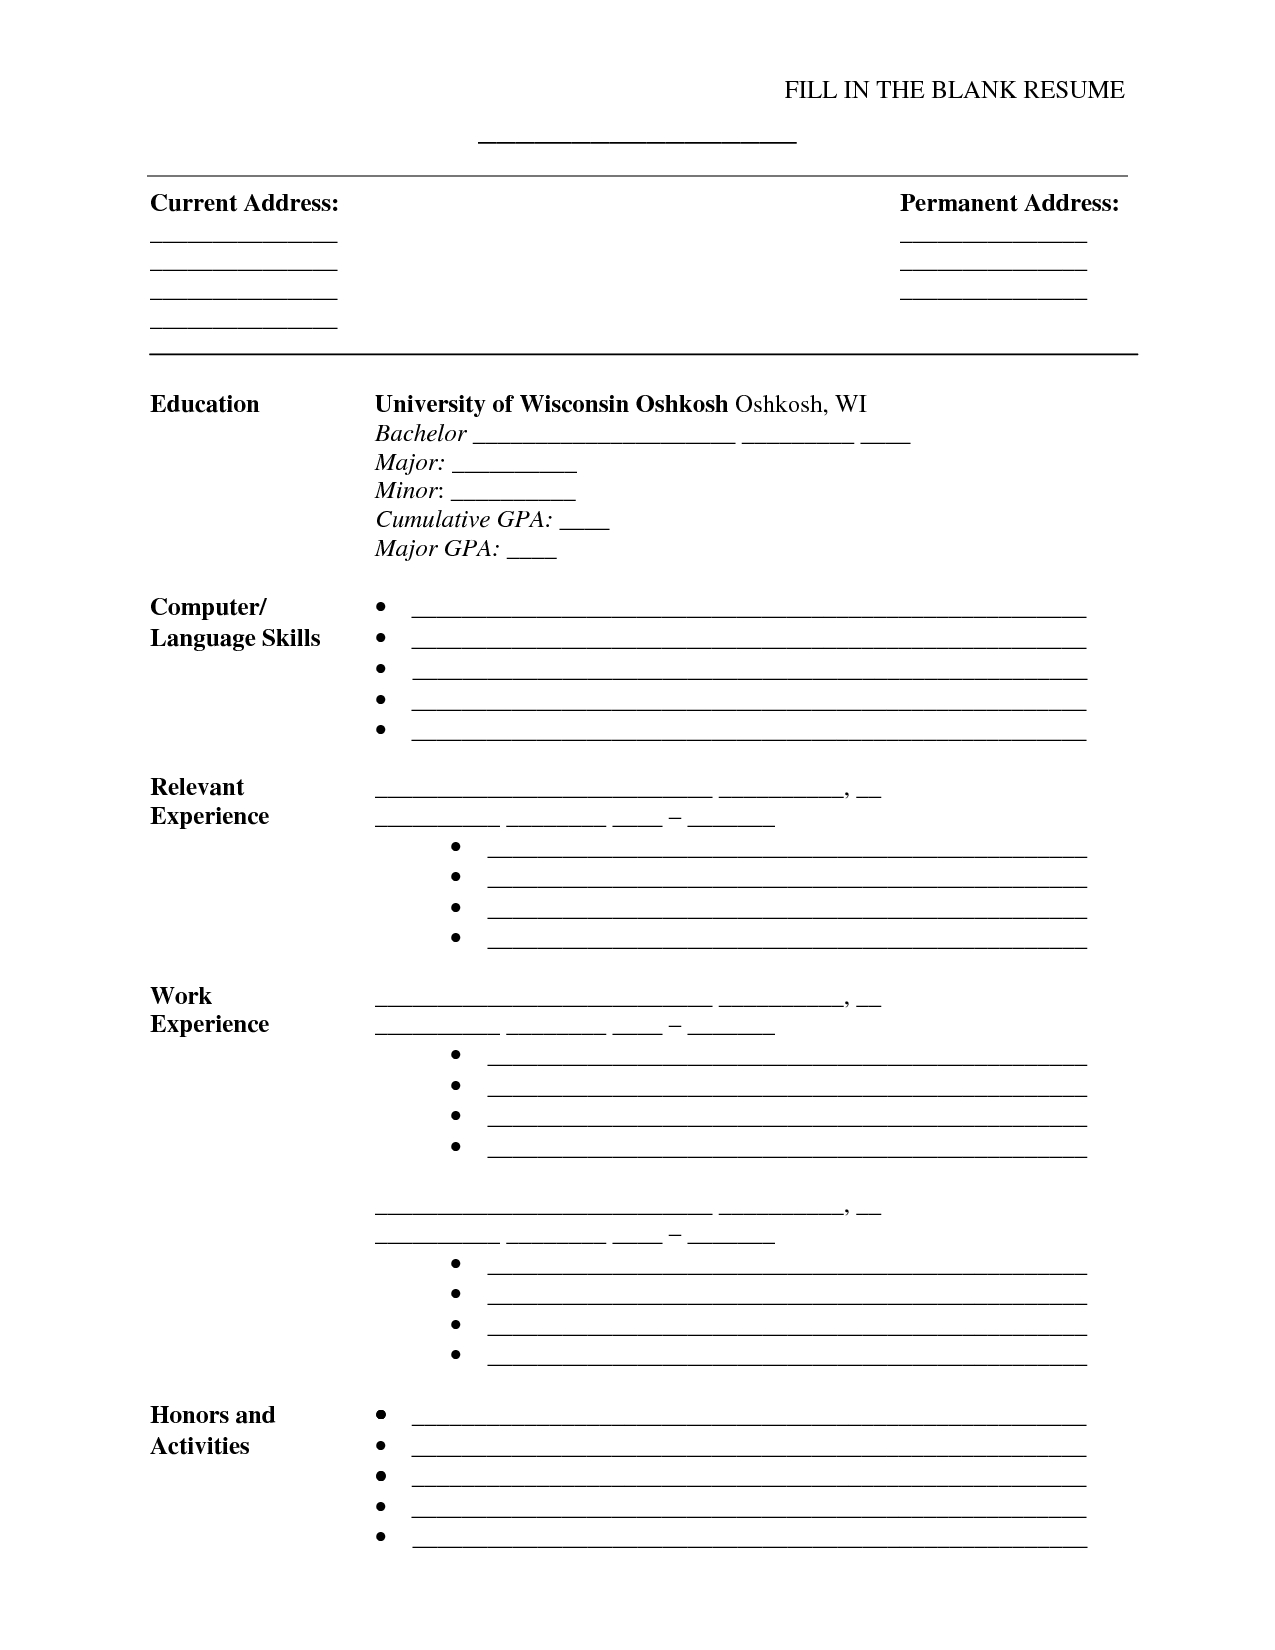 Fill In The Blank Resume Pdf | Resume Examples In Blank Resume Templates For Microsoft Word